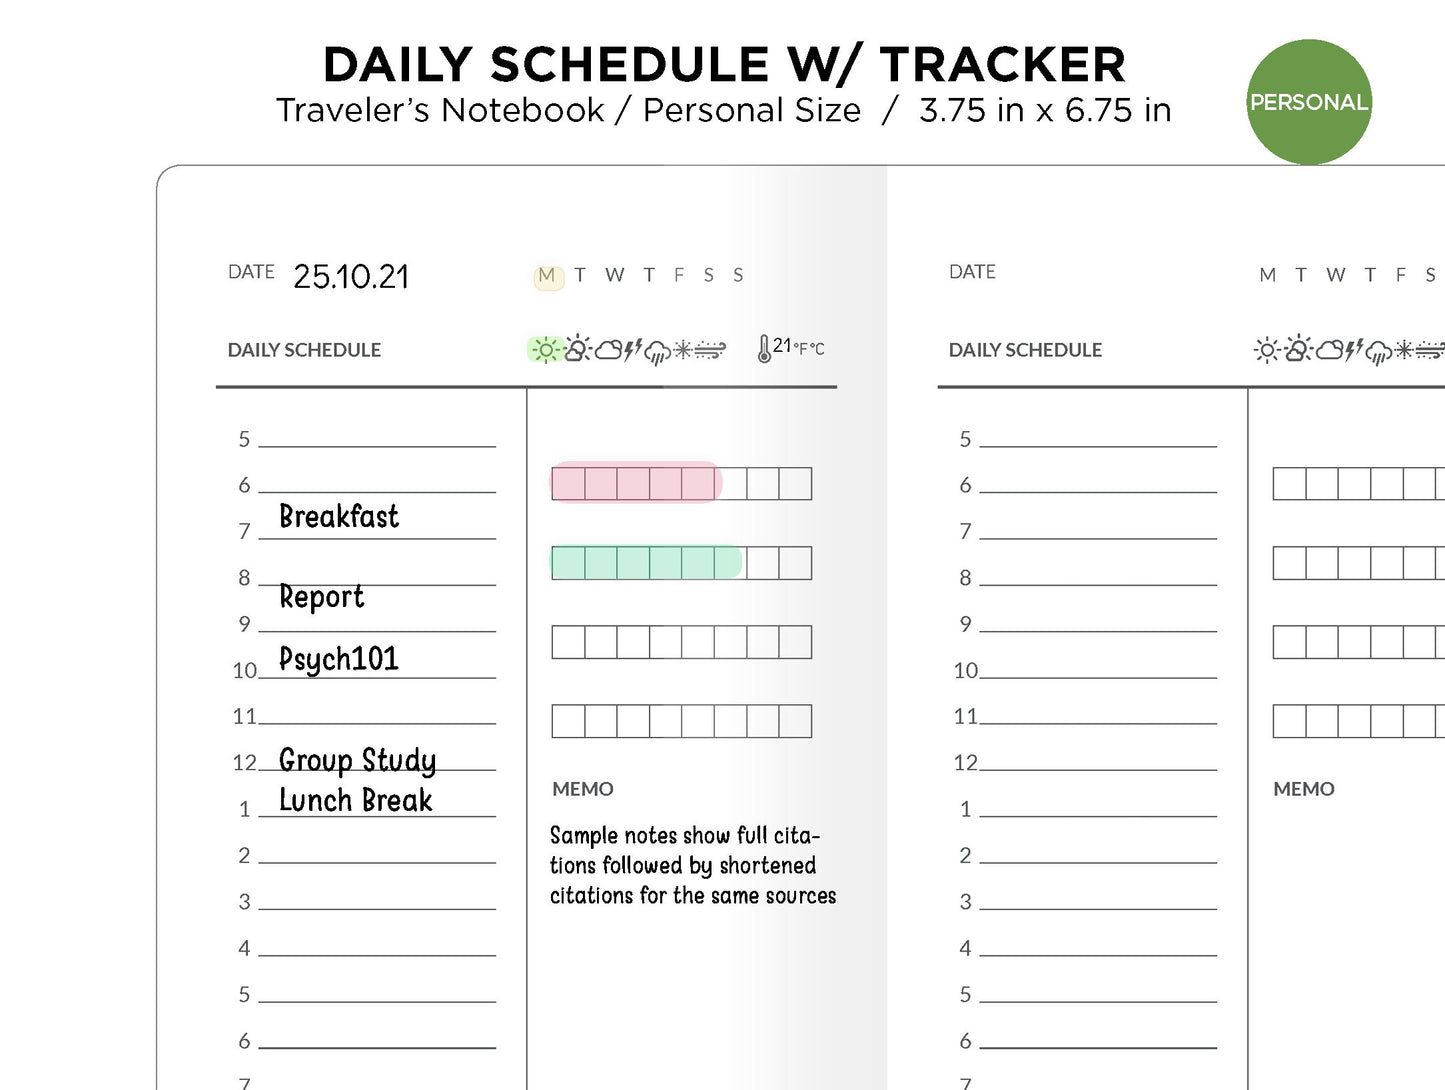 TN Personal DAILY Schedule with TRACKER Printable Insert Traveler's Notebook Minimalist